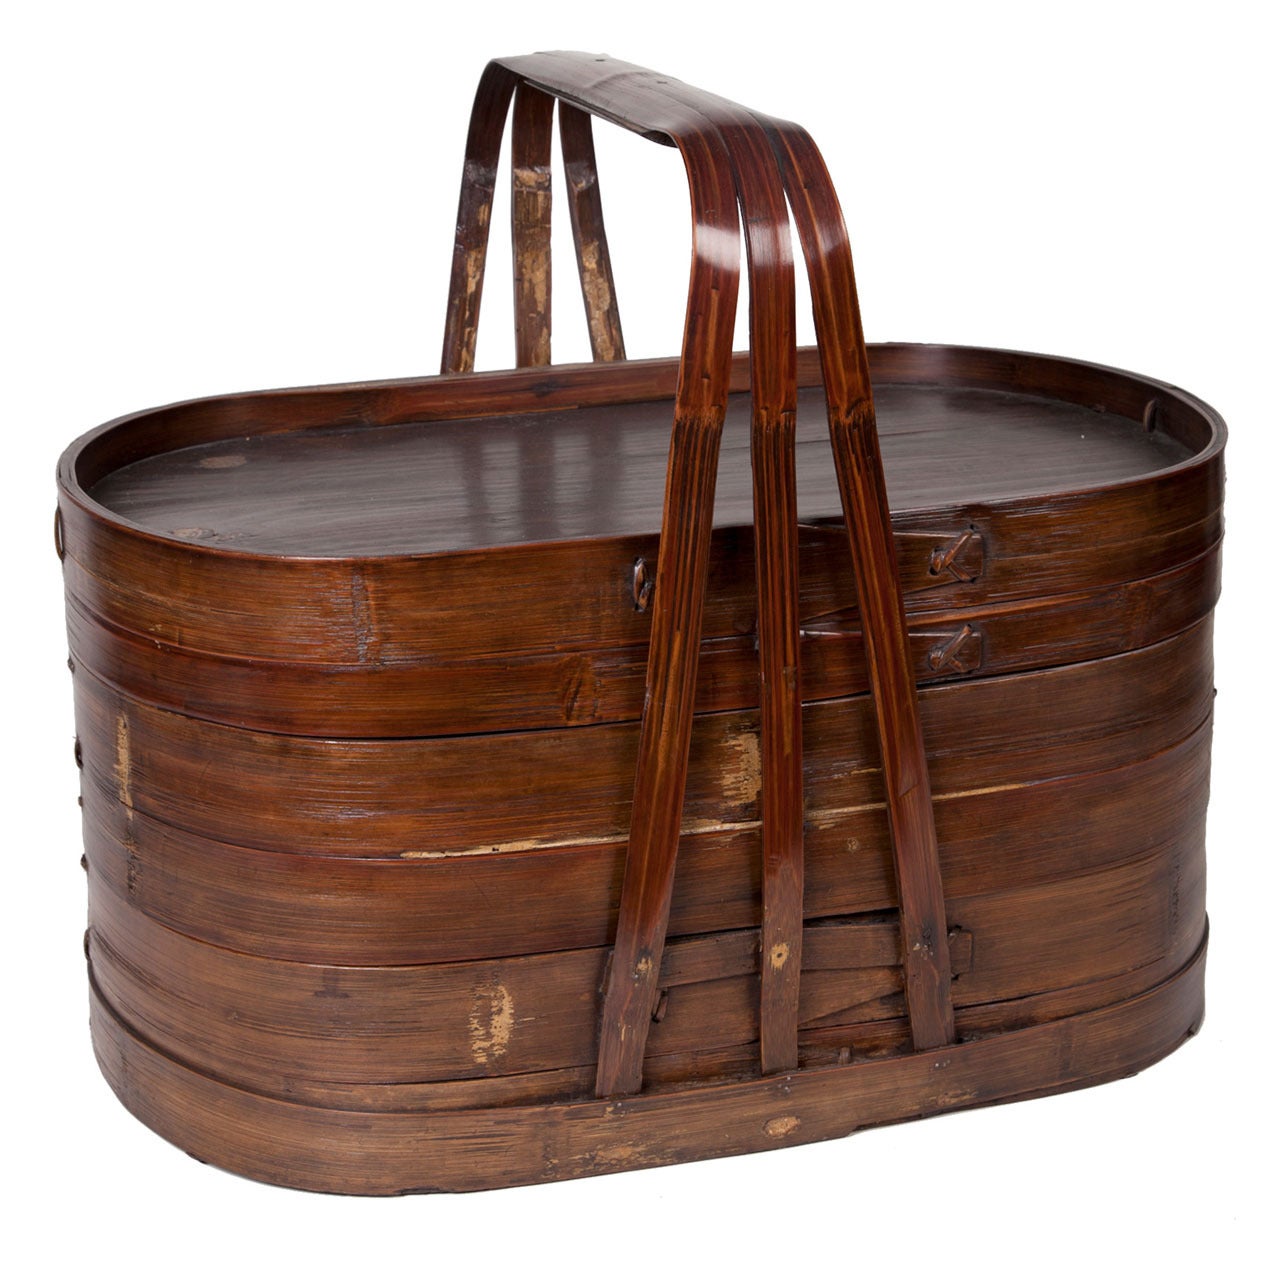 Bamboo Food Basket For Sale